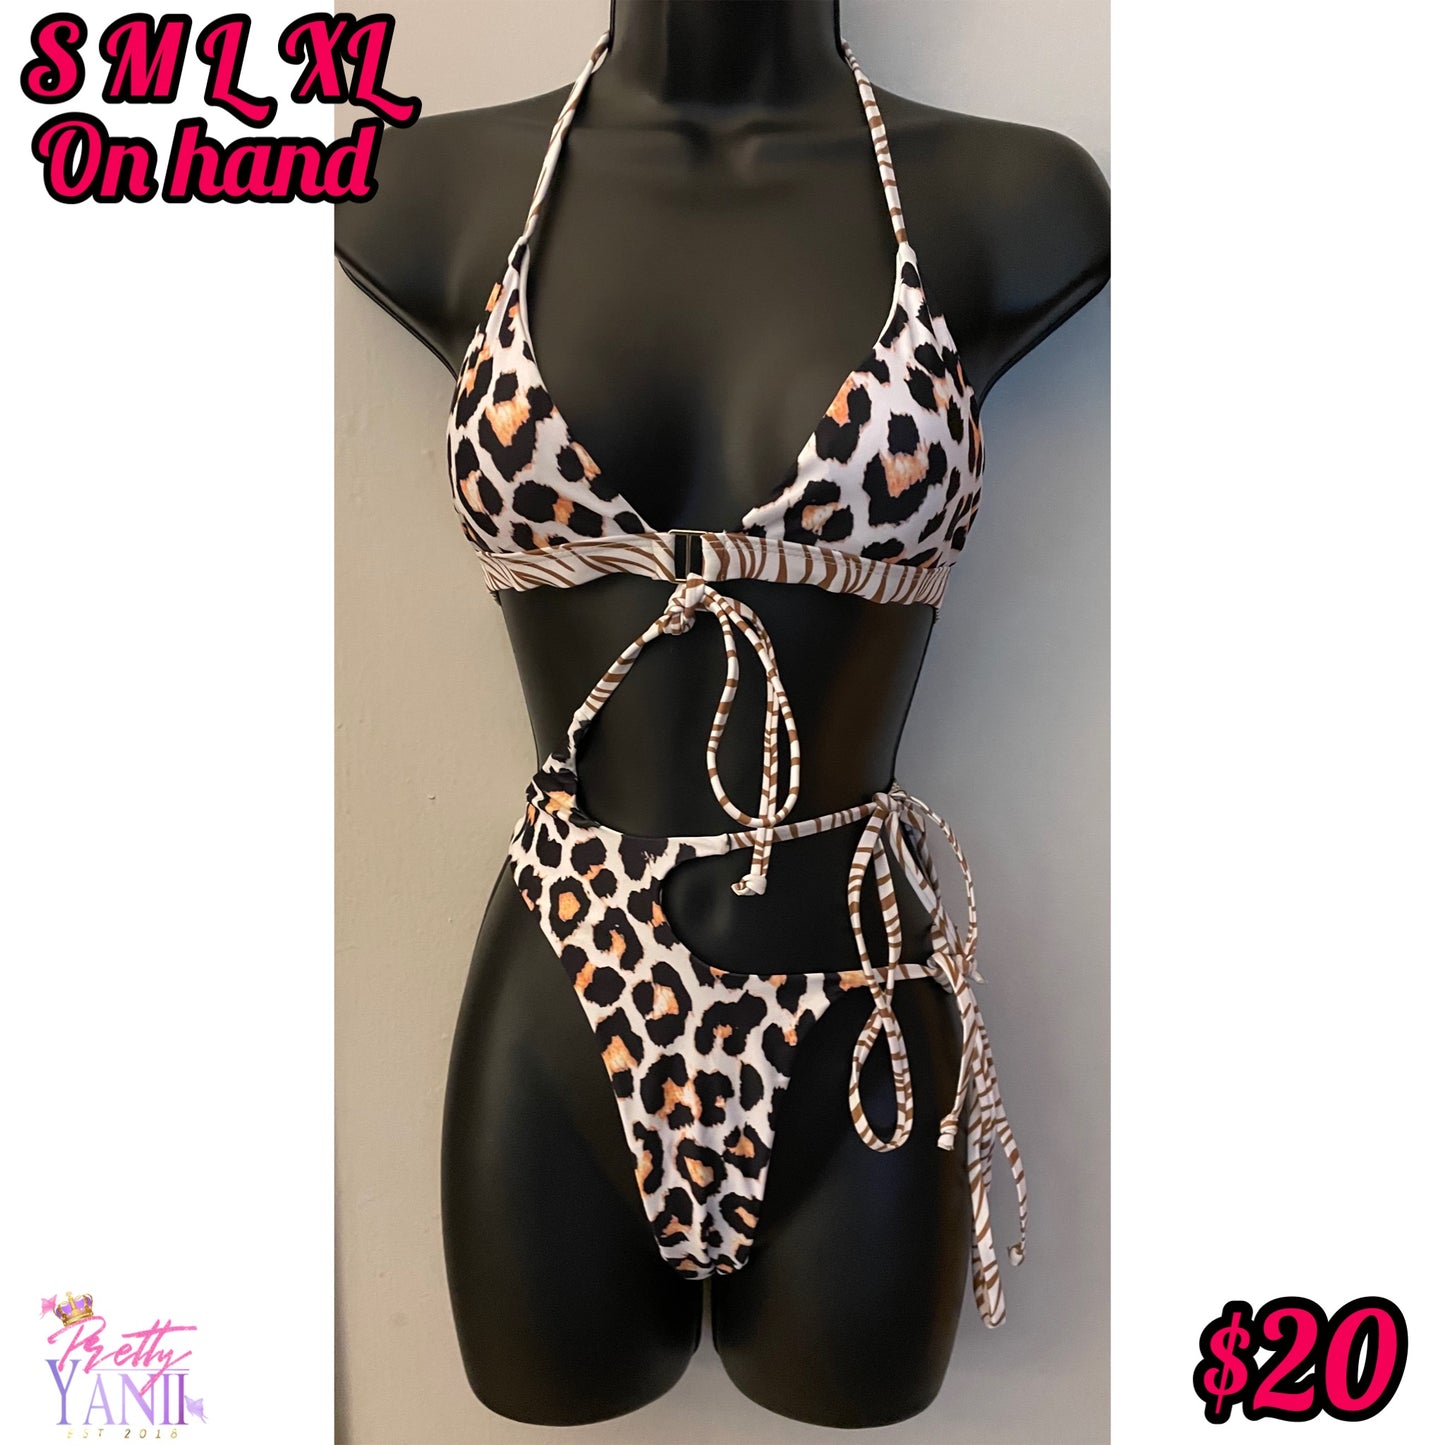 Leopard bikini swimsuit features a triangle halter top design that easily converts it into a one-piece